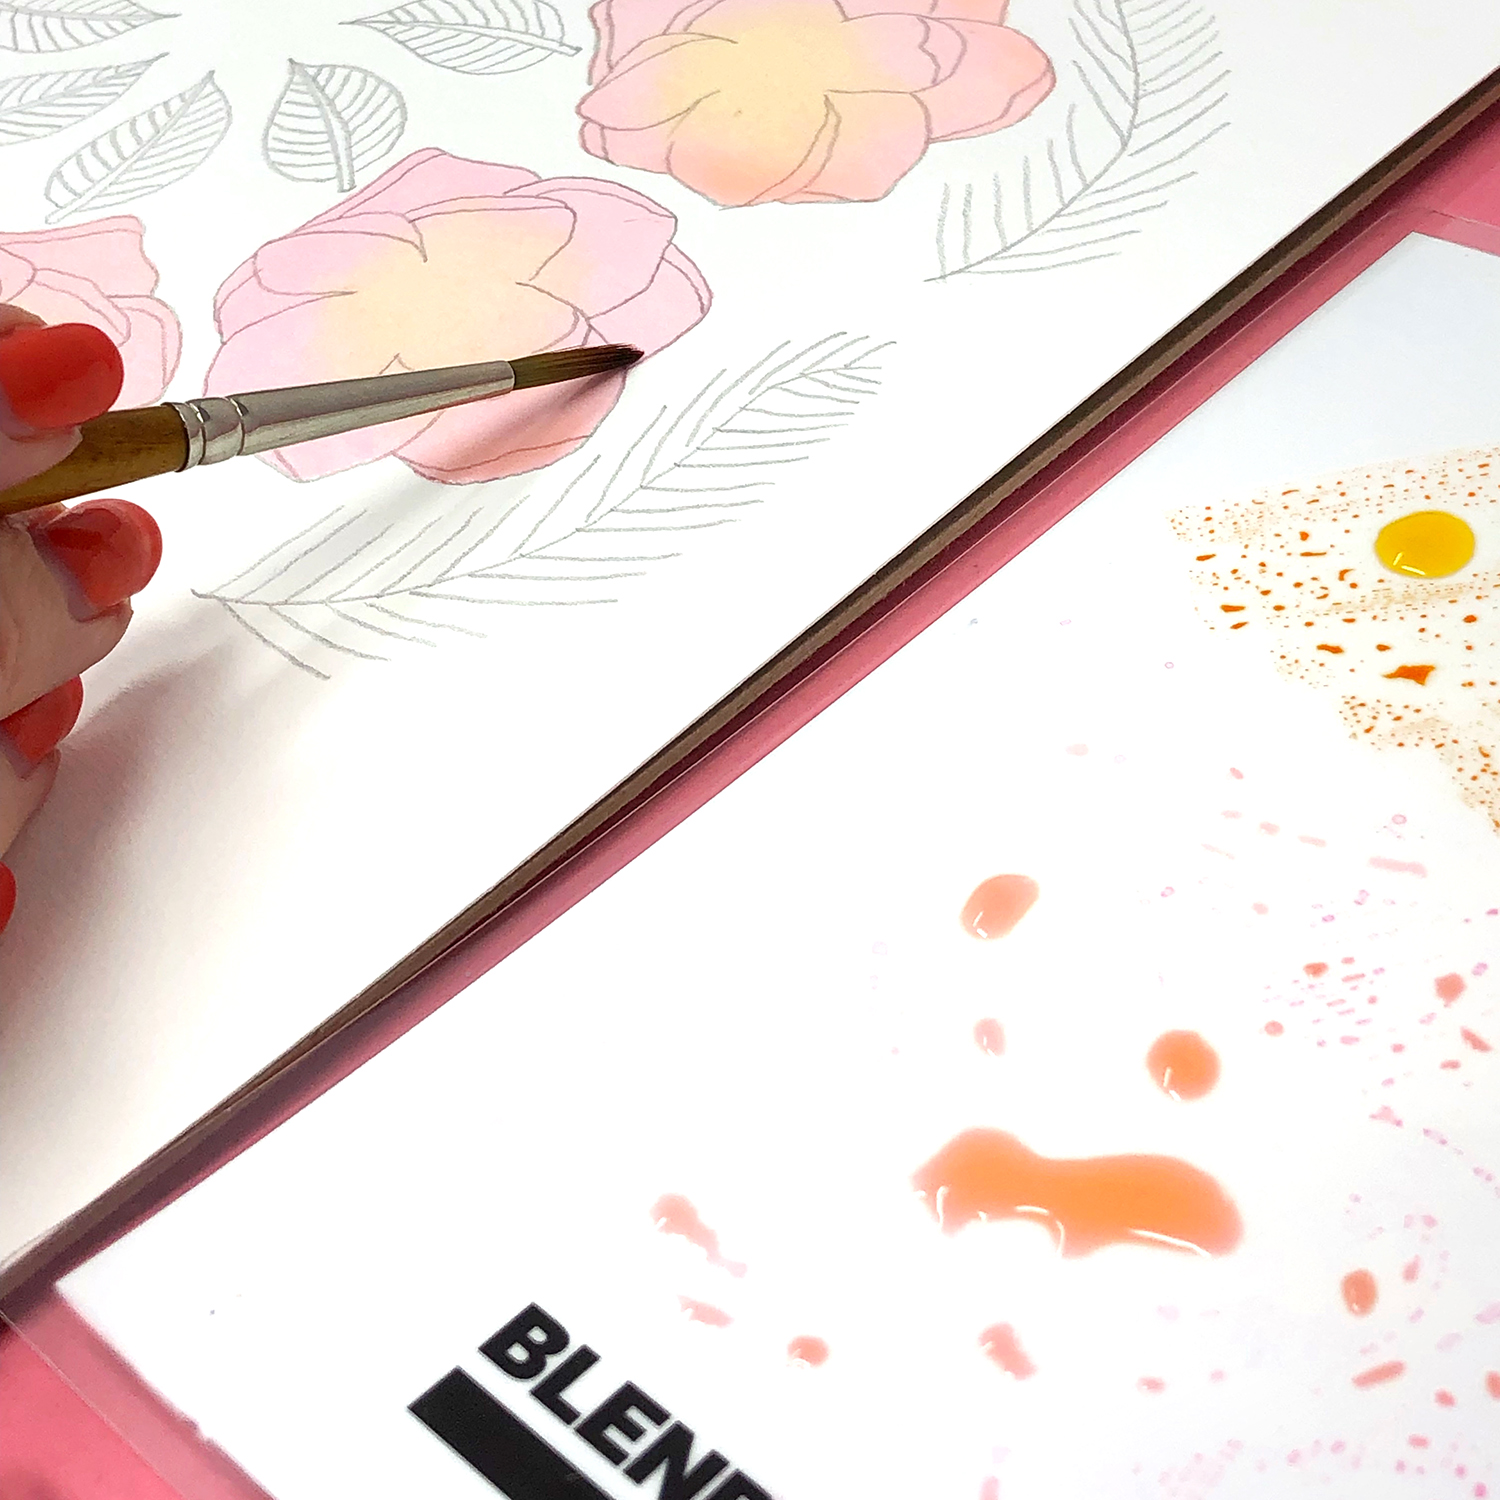 Blending Dual Brush Pens With Water by Jessica Mack on behalf of Tombow